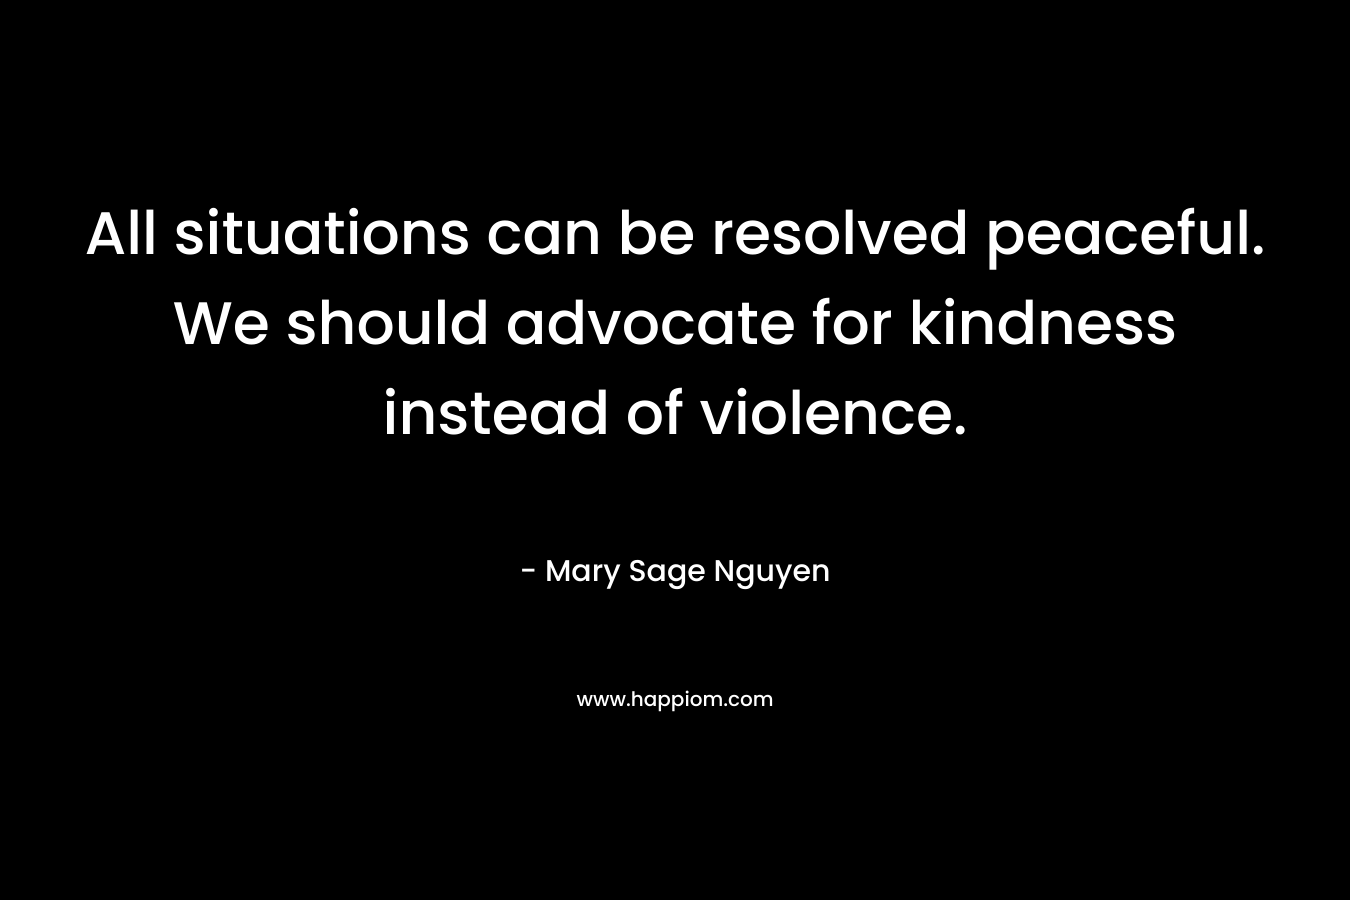 All situations can be resolved peaceful. We should advocate for kindness instead of violence.